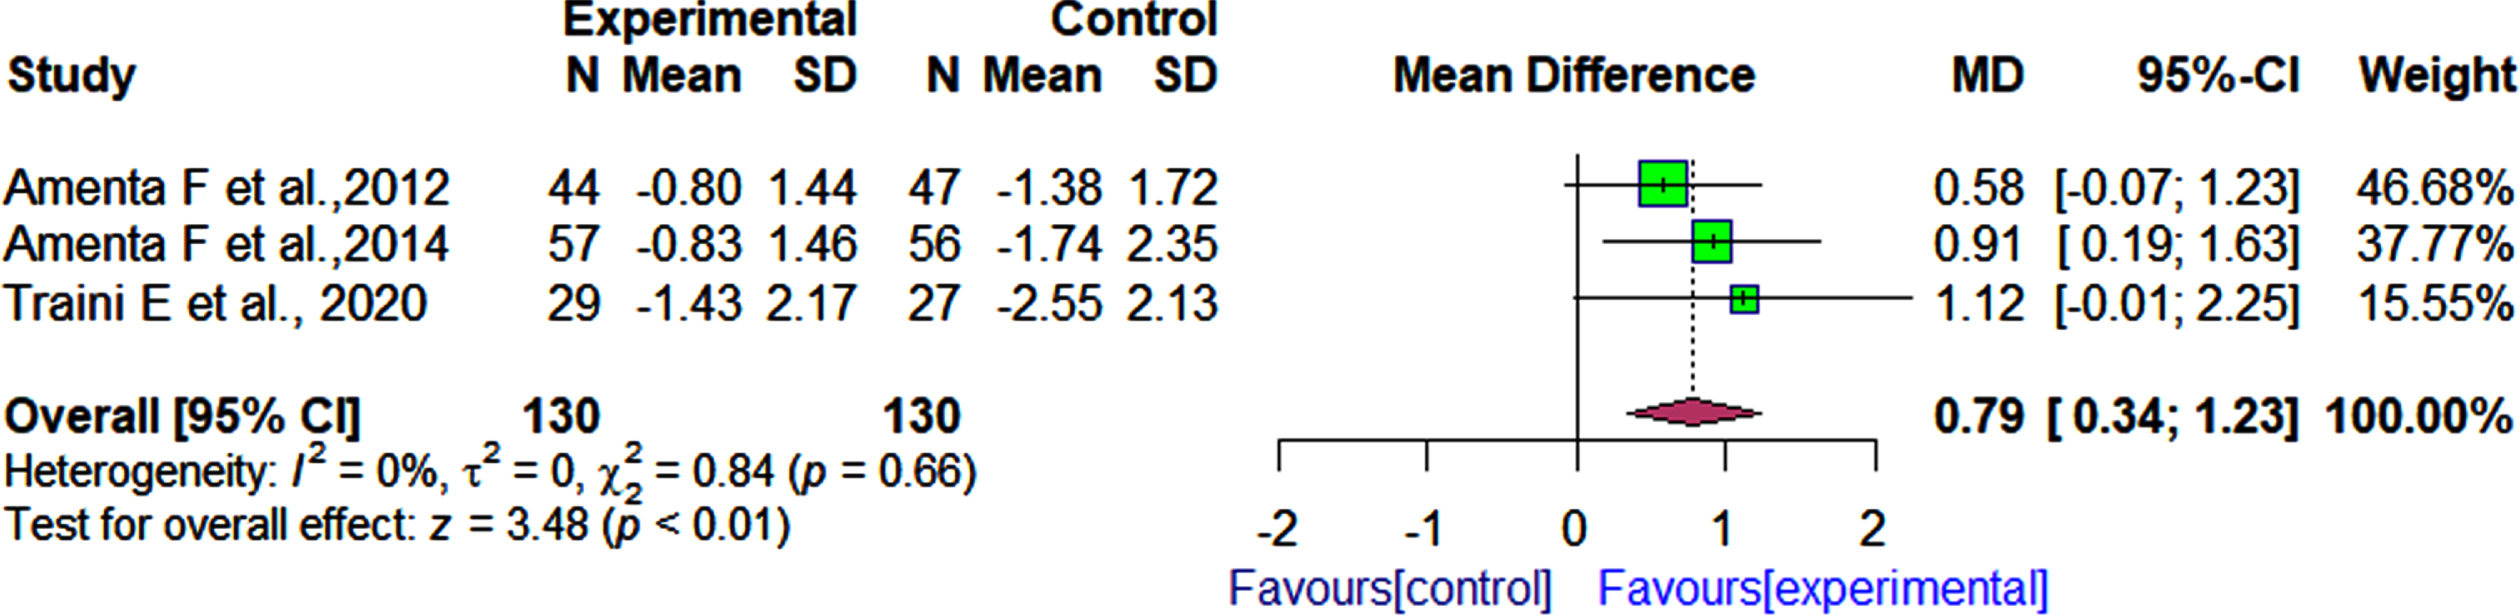 Comparison of effects of choline alphoscerate (1200 mg/day) and donepezil (10 mg/day) rand placebo and donepezil (10 mg/day) on patient functional outcomes as measured by the IADL after follow-up periods ranging from 360 days to 720 days.